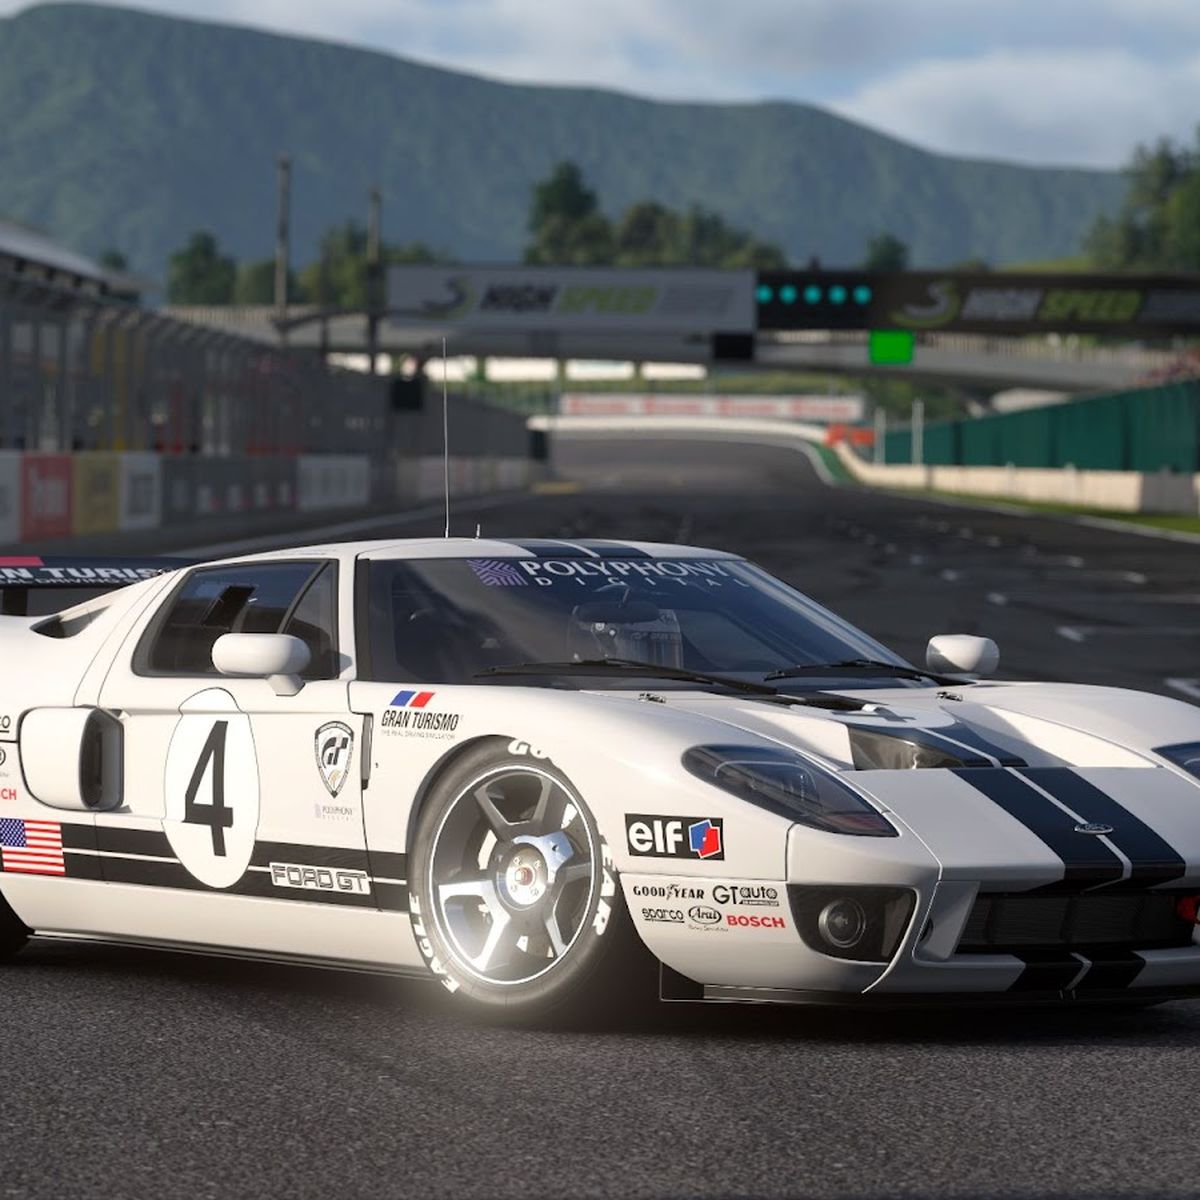 Gran Turismo 7 is the line between gaming and the real world